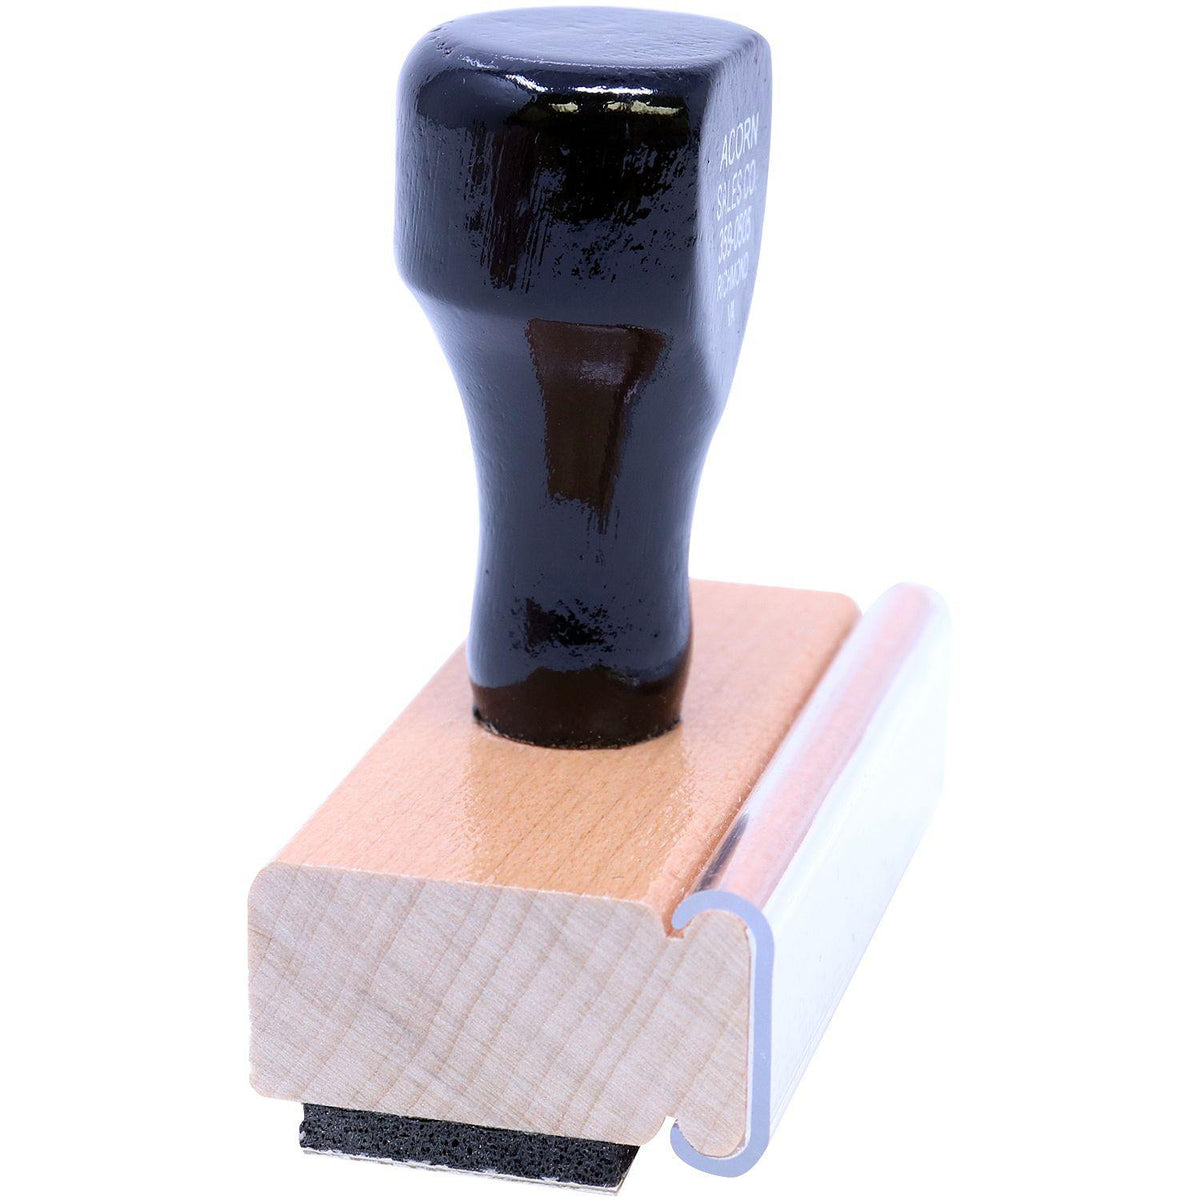 Legal Damages Rubber Stamp - Engineer Seal Stamps - Brand_Acorn, Impression Size_Small, Stamp Type_Regular Stamp, Type of Use_Postal &amp; Mailing, Type of Use_Shipping &amp; Receiving